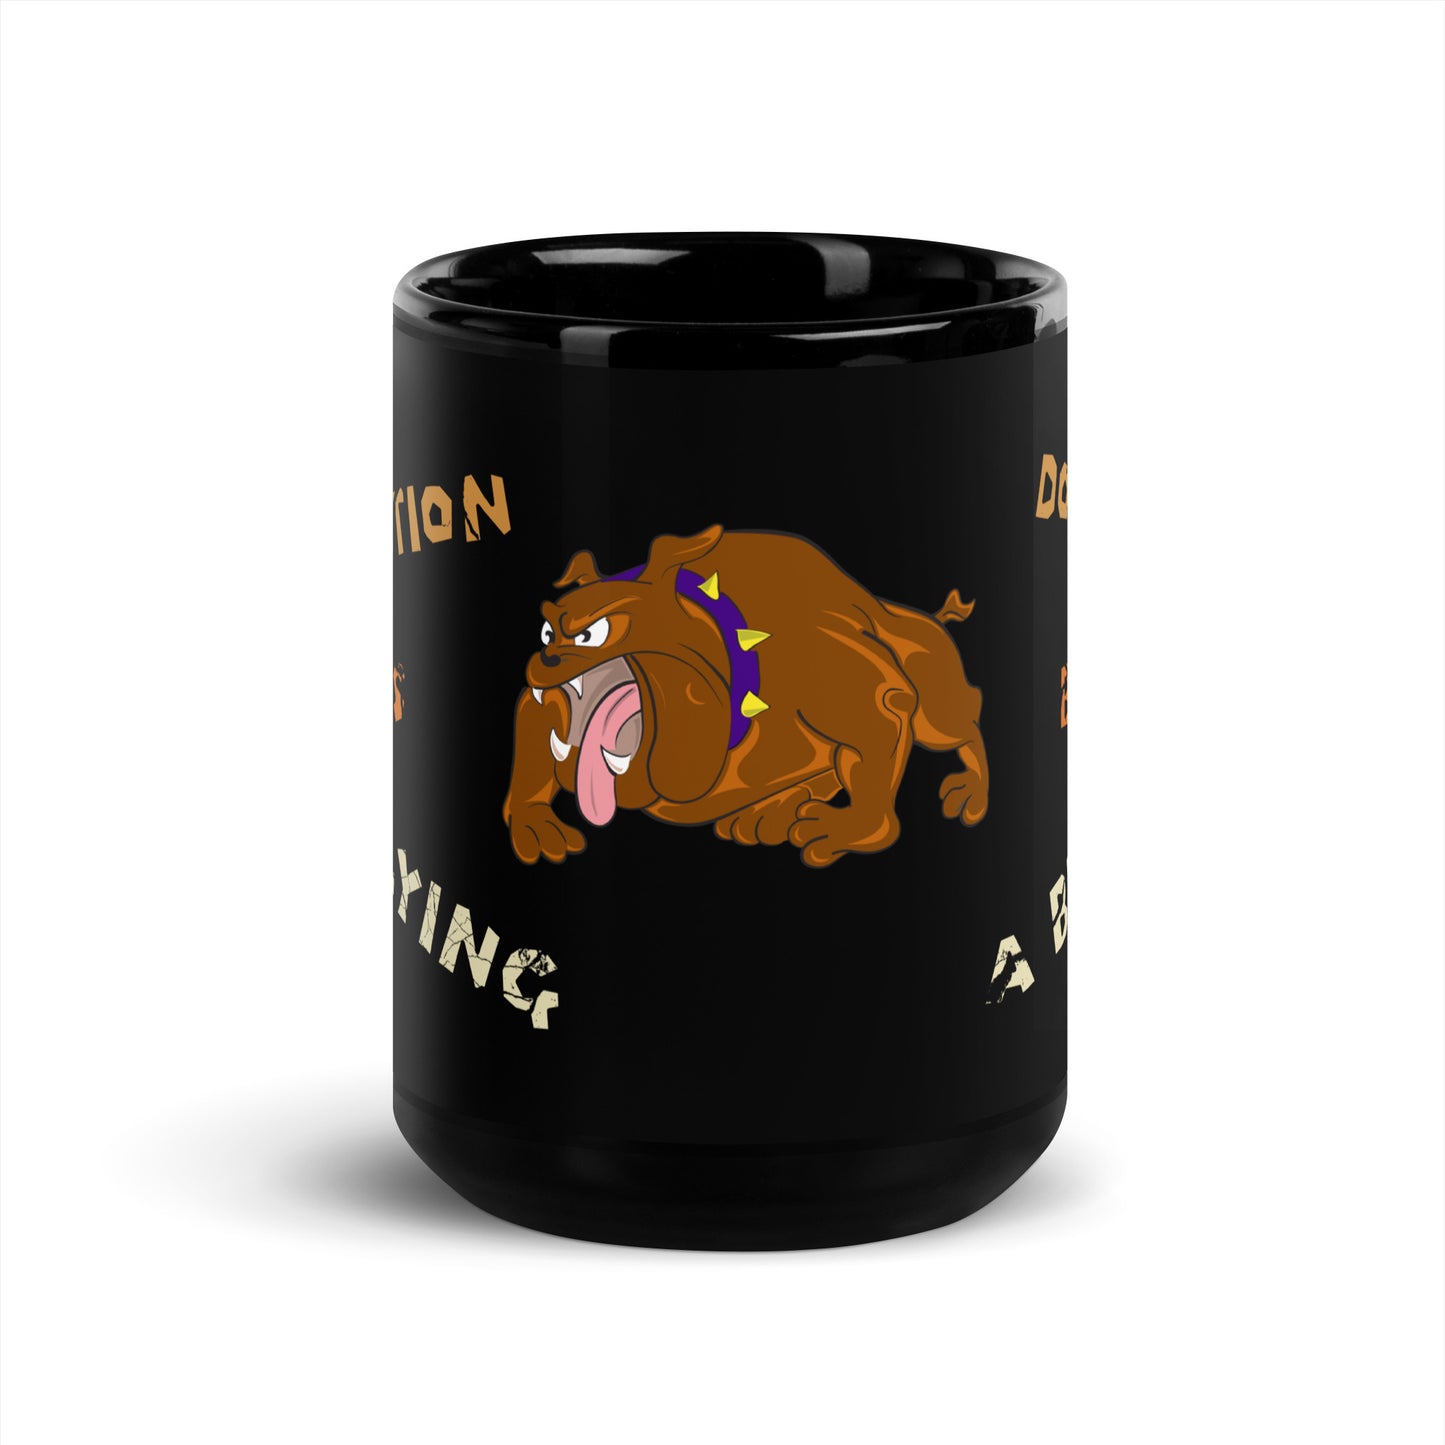 A001 Mug - Black Glossy Ceramic Mug Featuring Bulldog Graphic with text “Abortion is Bullying. Don’t be a Bully.”